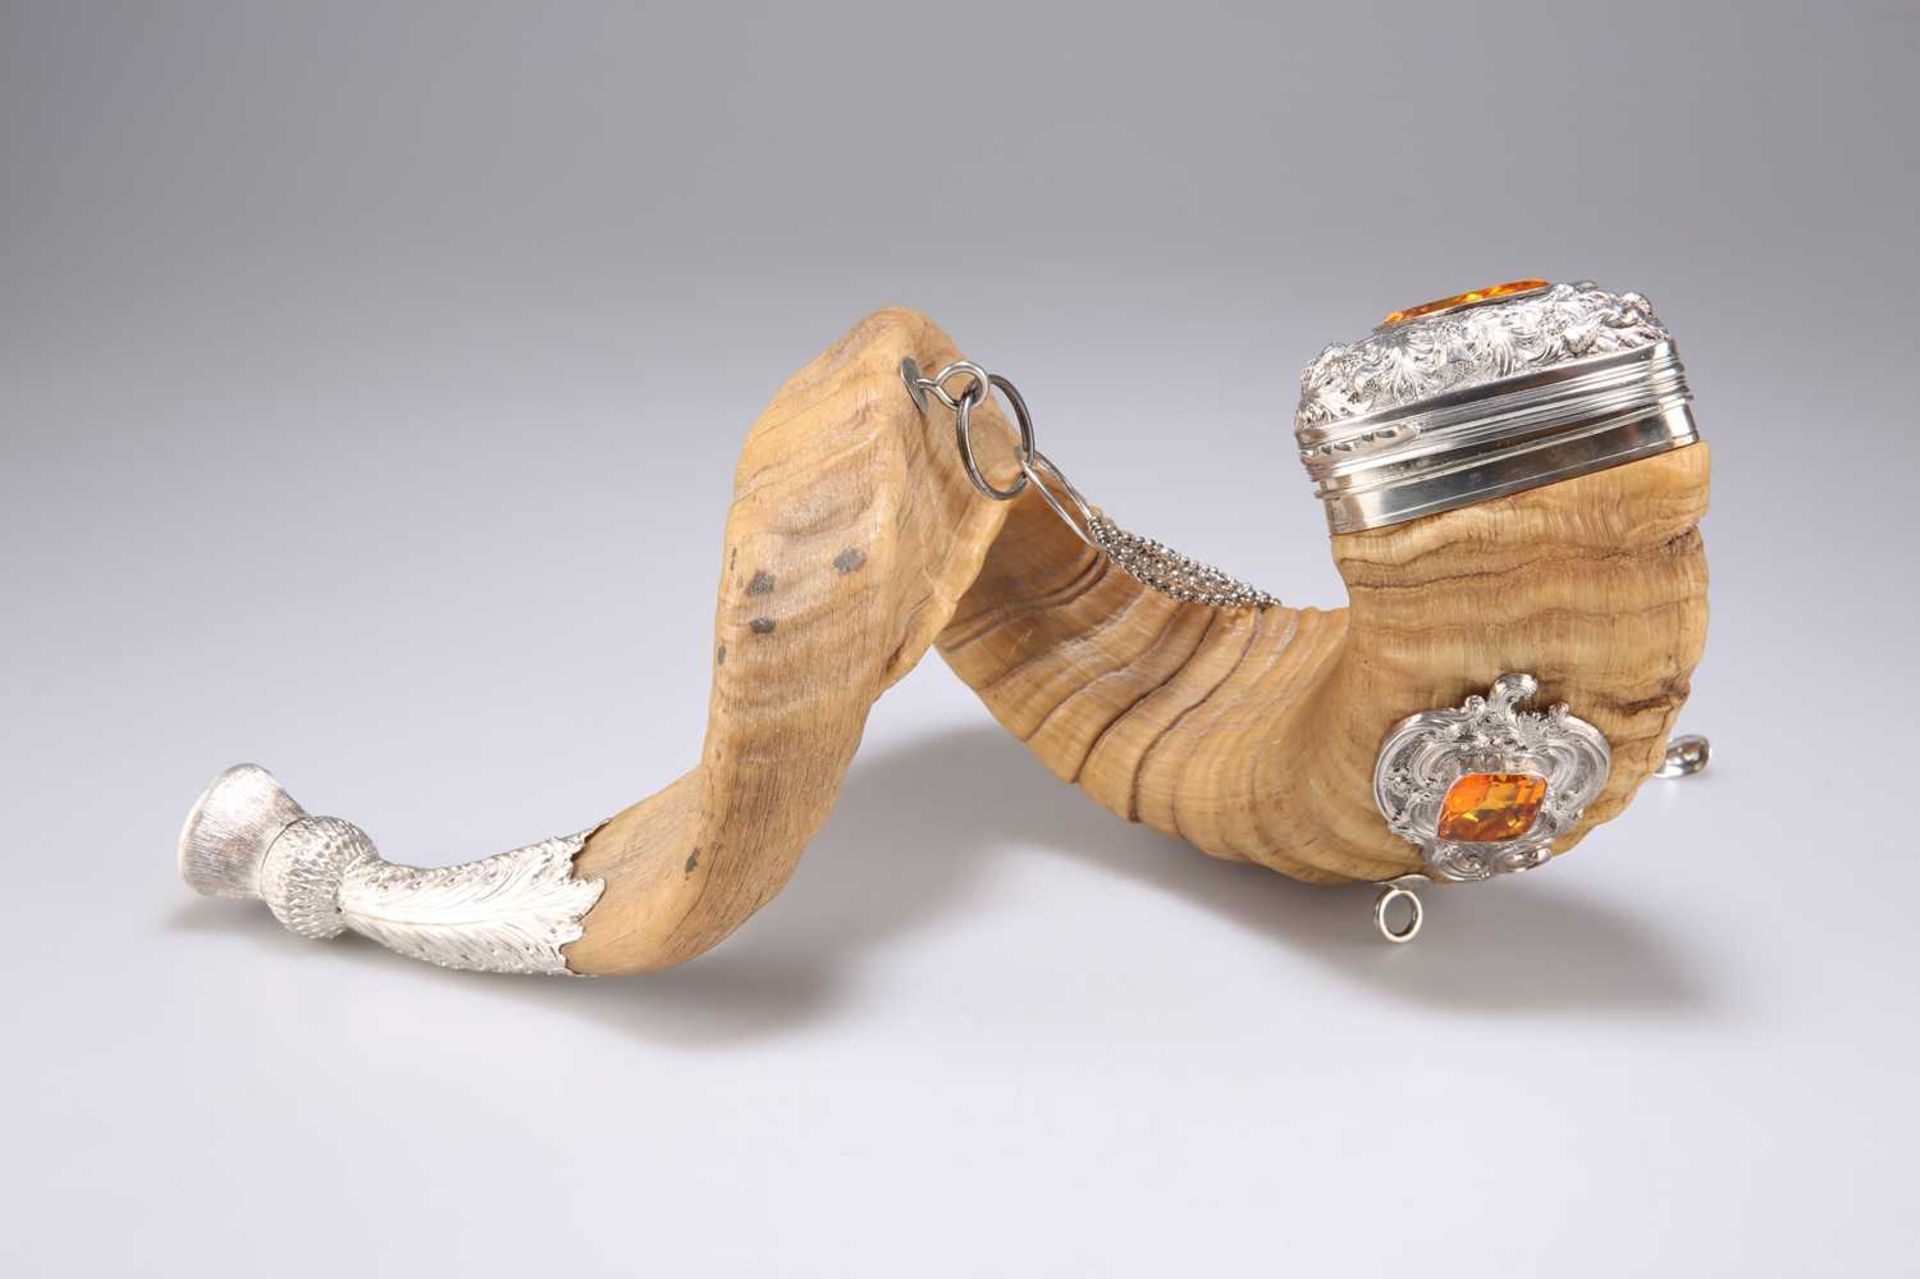 A FINE SCOTTISH SILVER-MOUNTED RAM'S HORN TABLE SNUFF MULL, CIRCA 1850 - Image 3 of 9